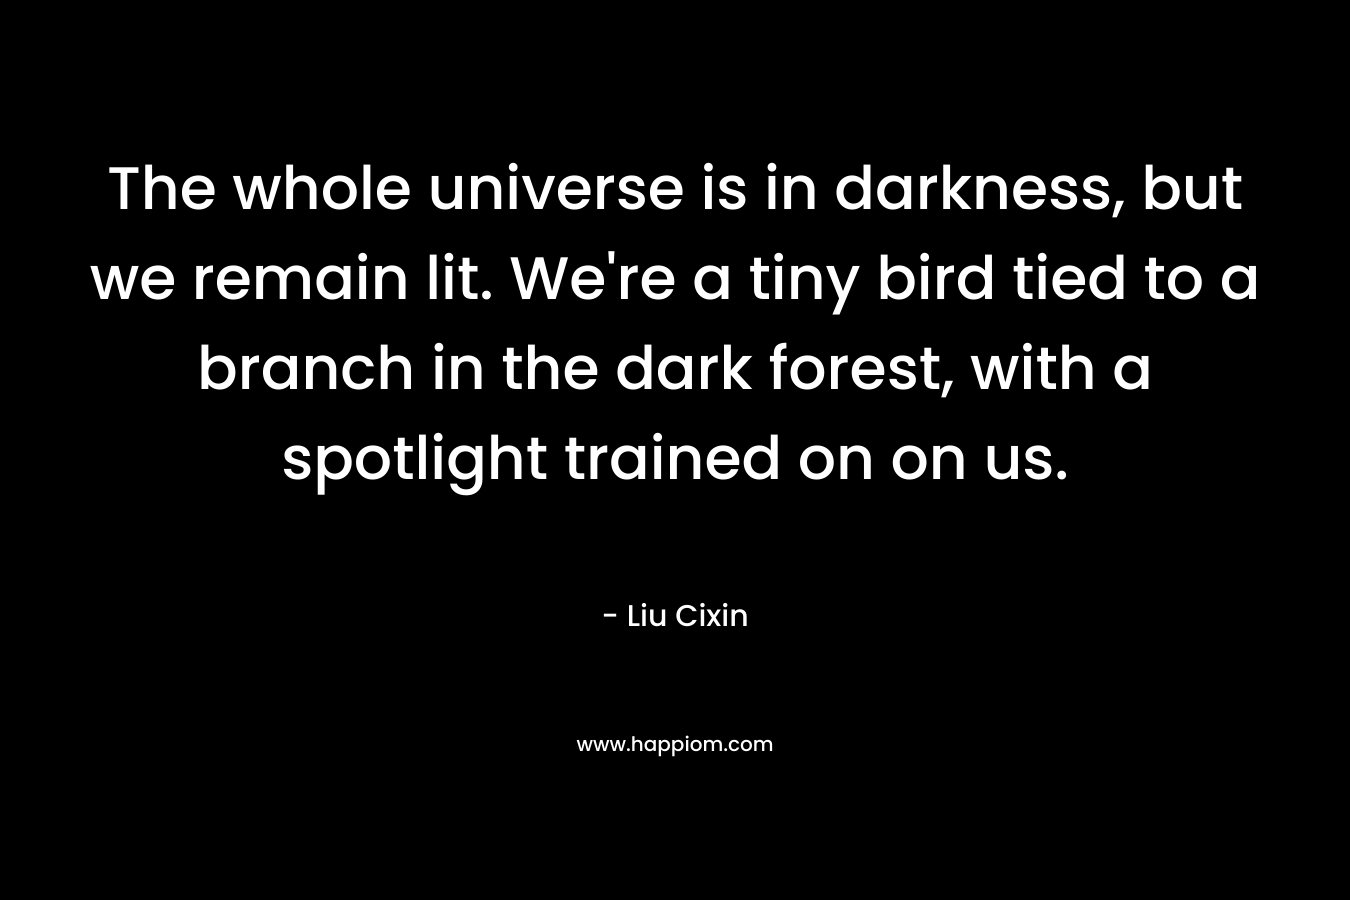 The whole universe is in darkness, but we remain lit. We’re a tiny bird tied to a branch in the dark forest, with a spotlight trained on on us. – Liu Cixin